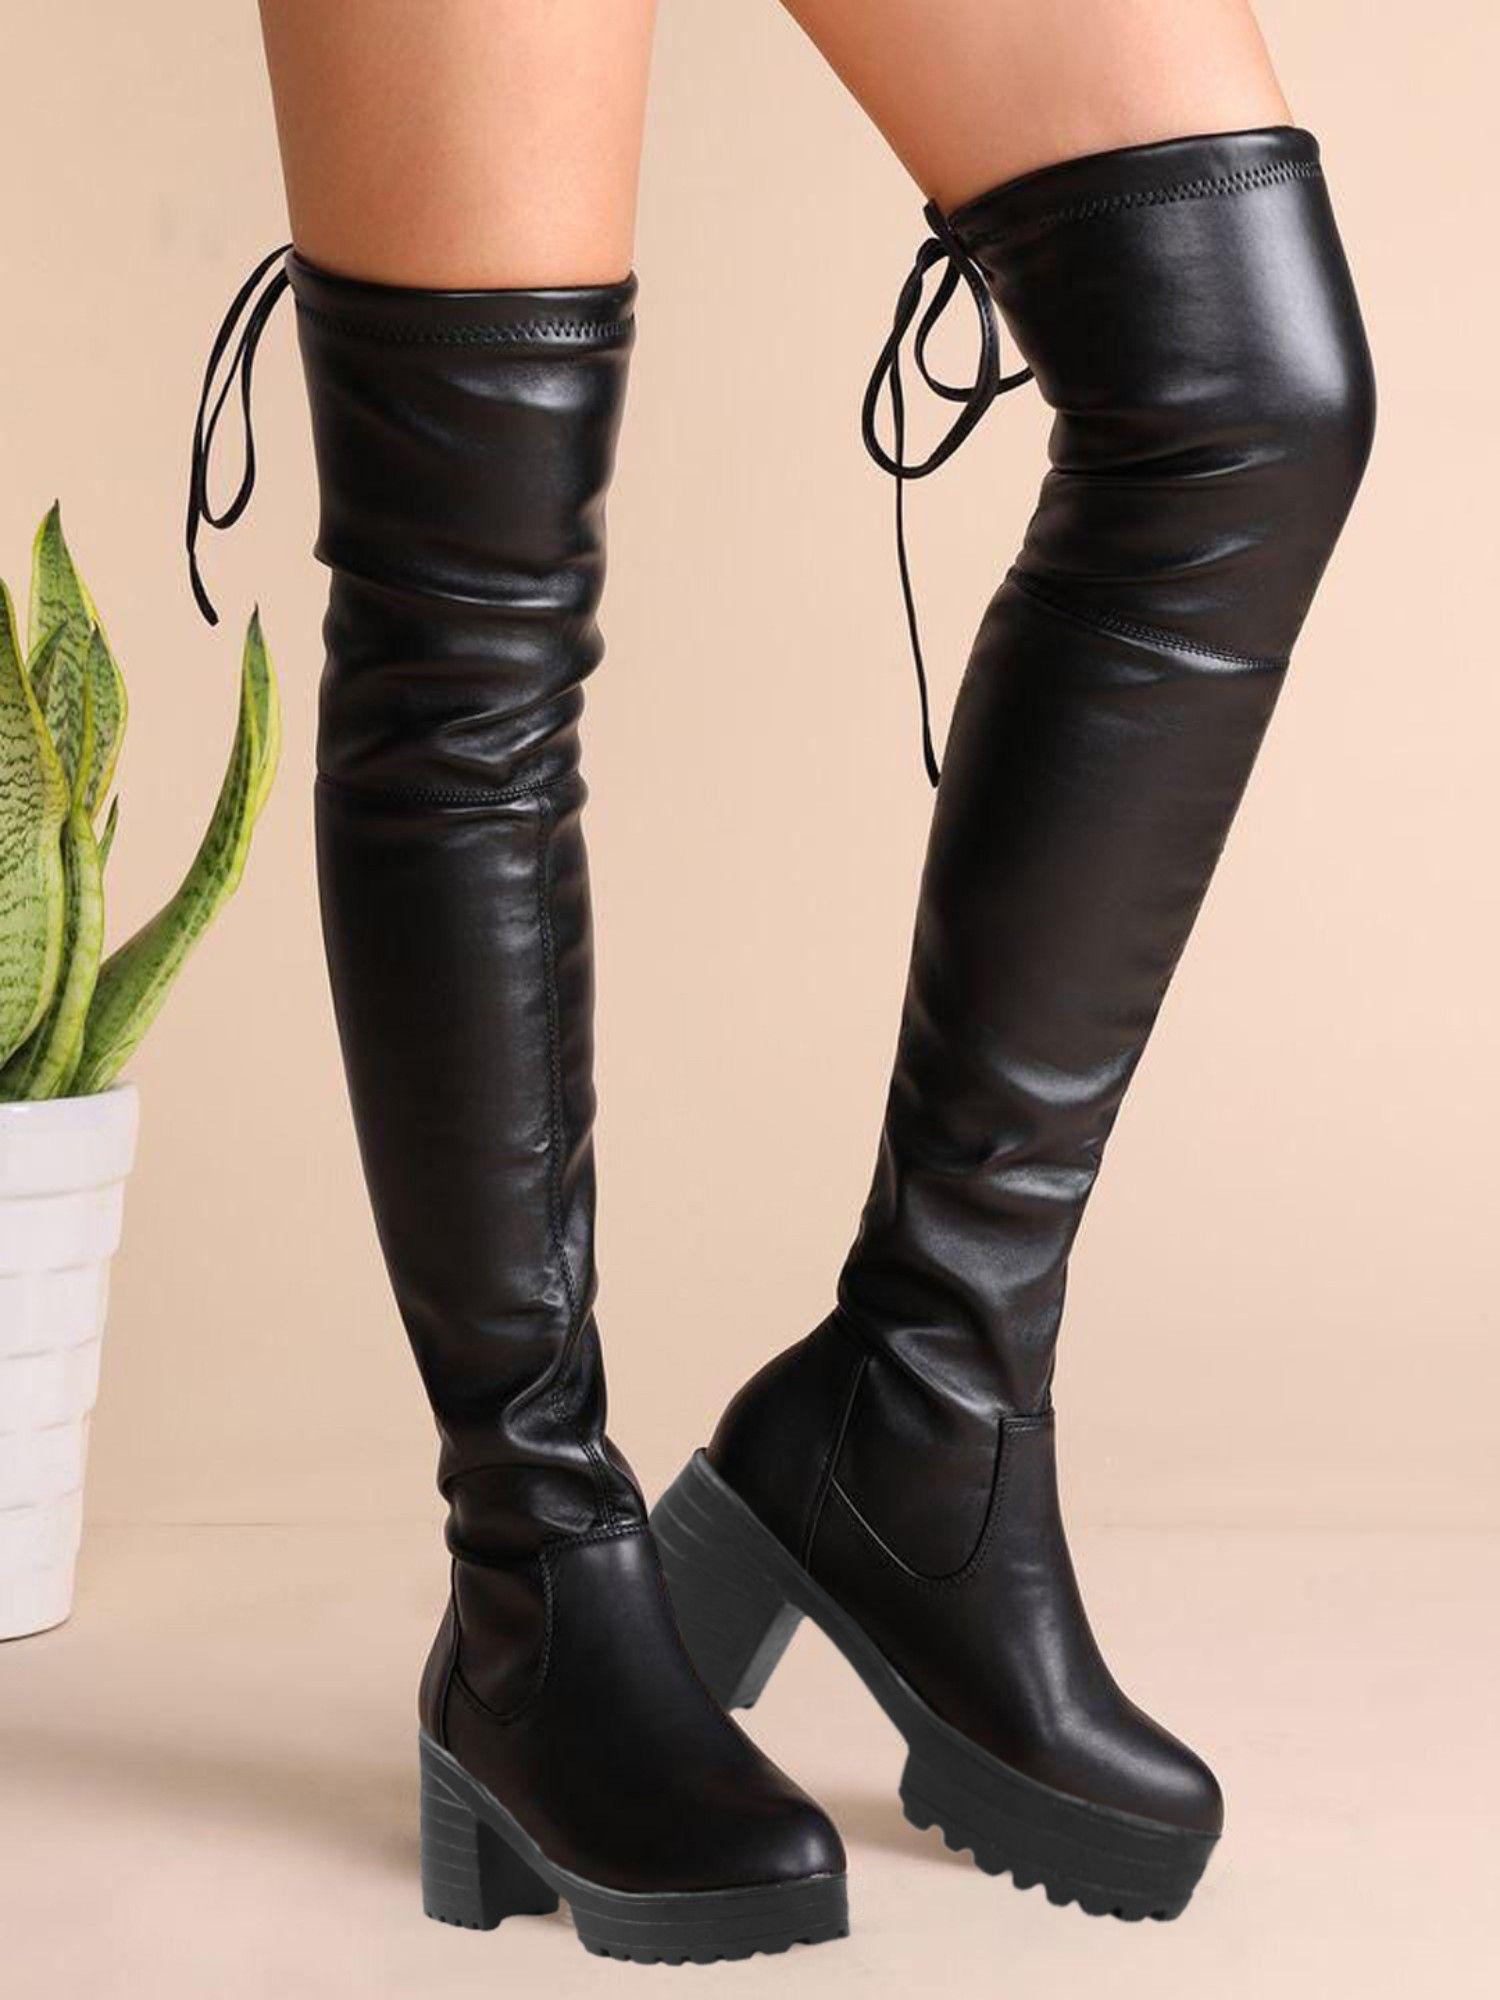 stylish-knee-high-long-black-boots-for-girls